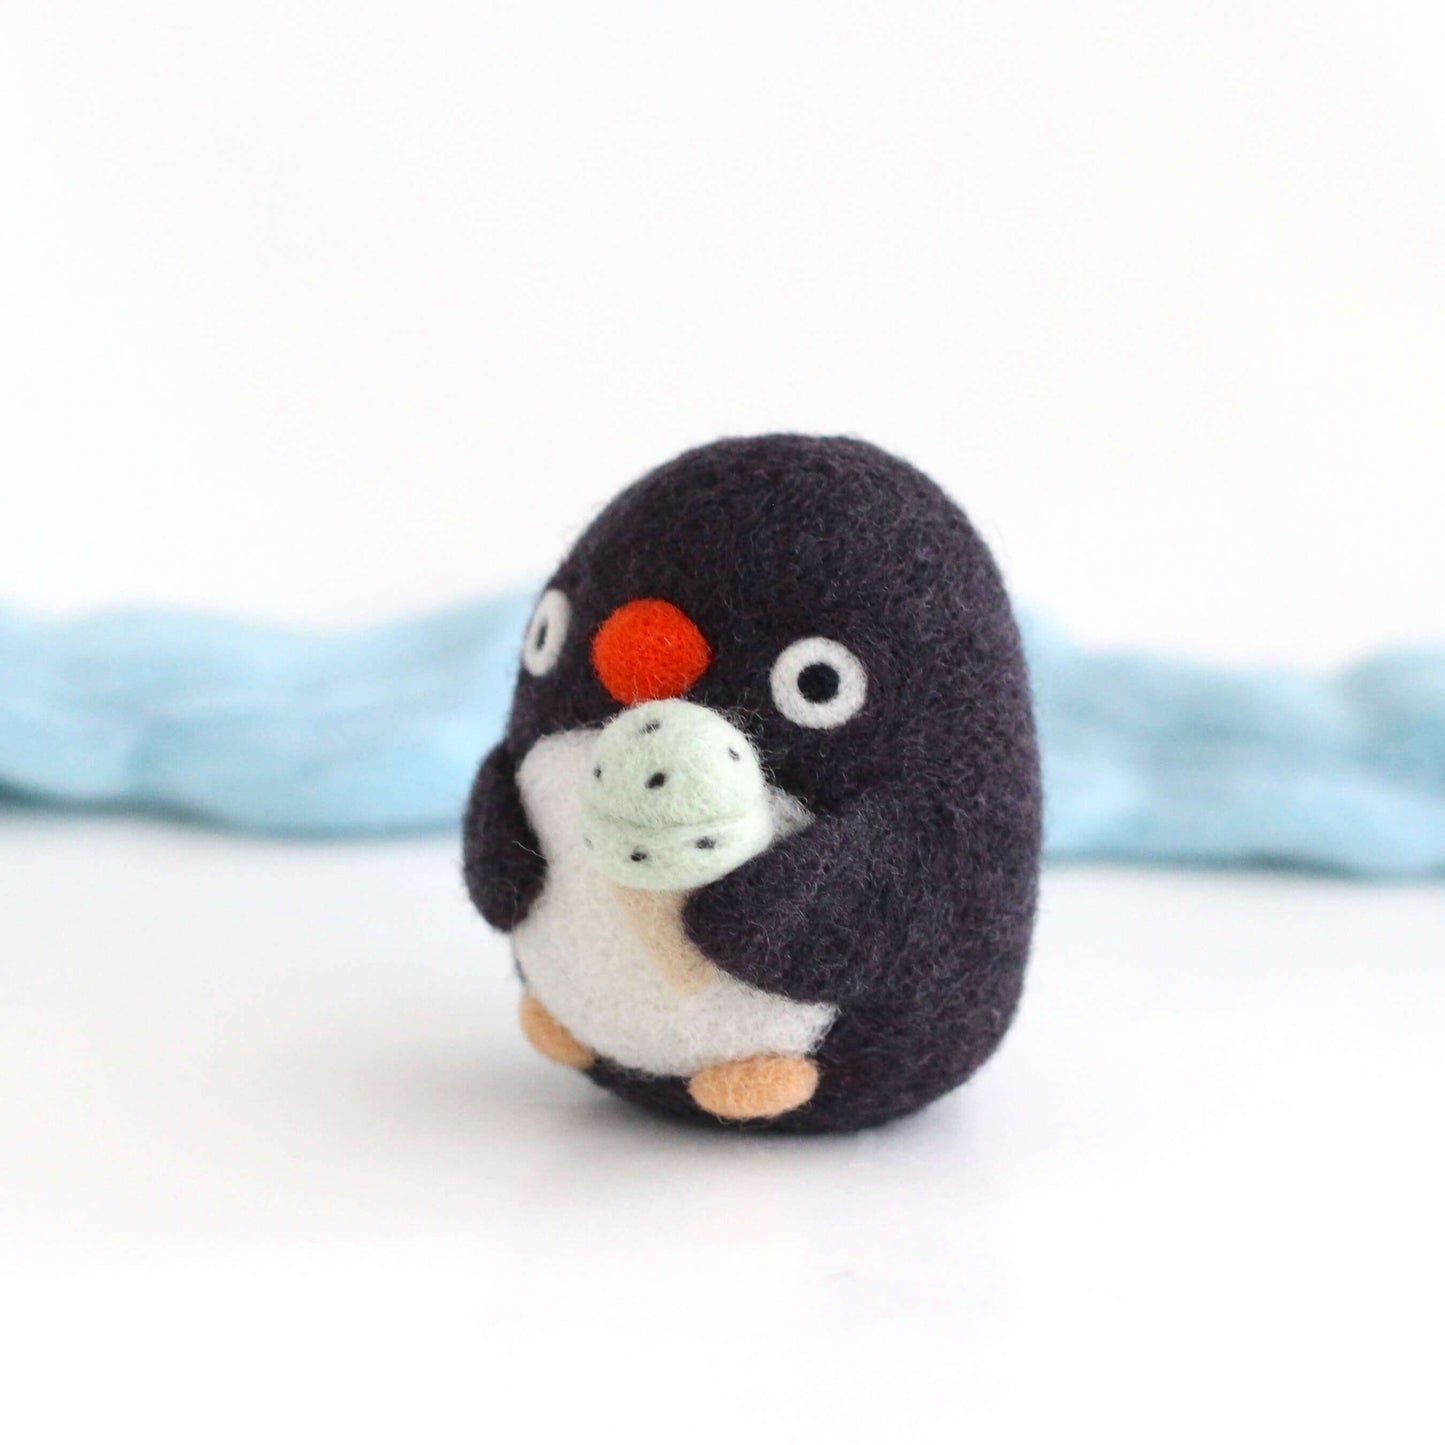 Needle Felted Adelie Penguin with Ice Cream Cone by Wild Whimsy Woolies